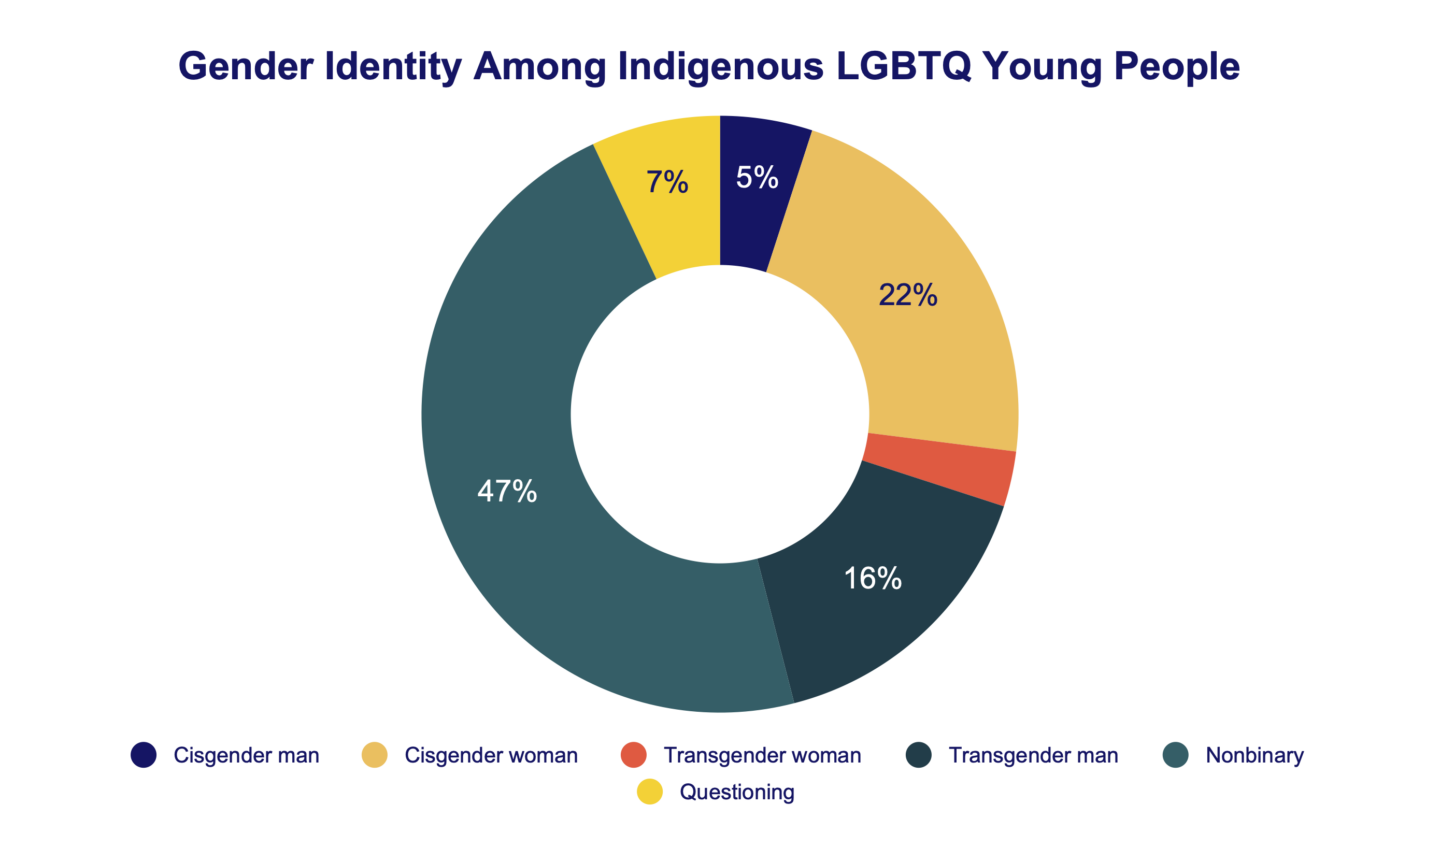 Gender Identity Among Indigenous LGBTQ Young People